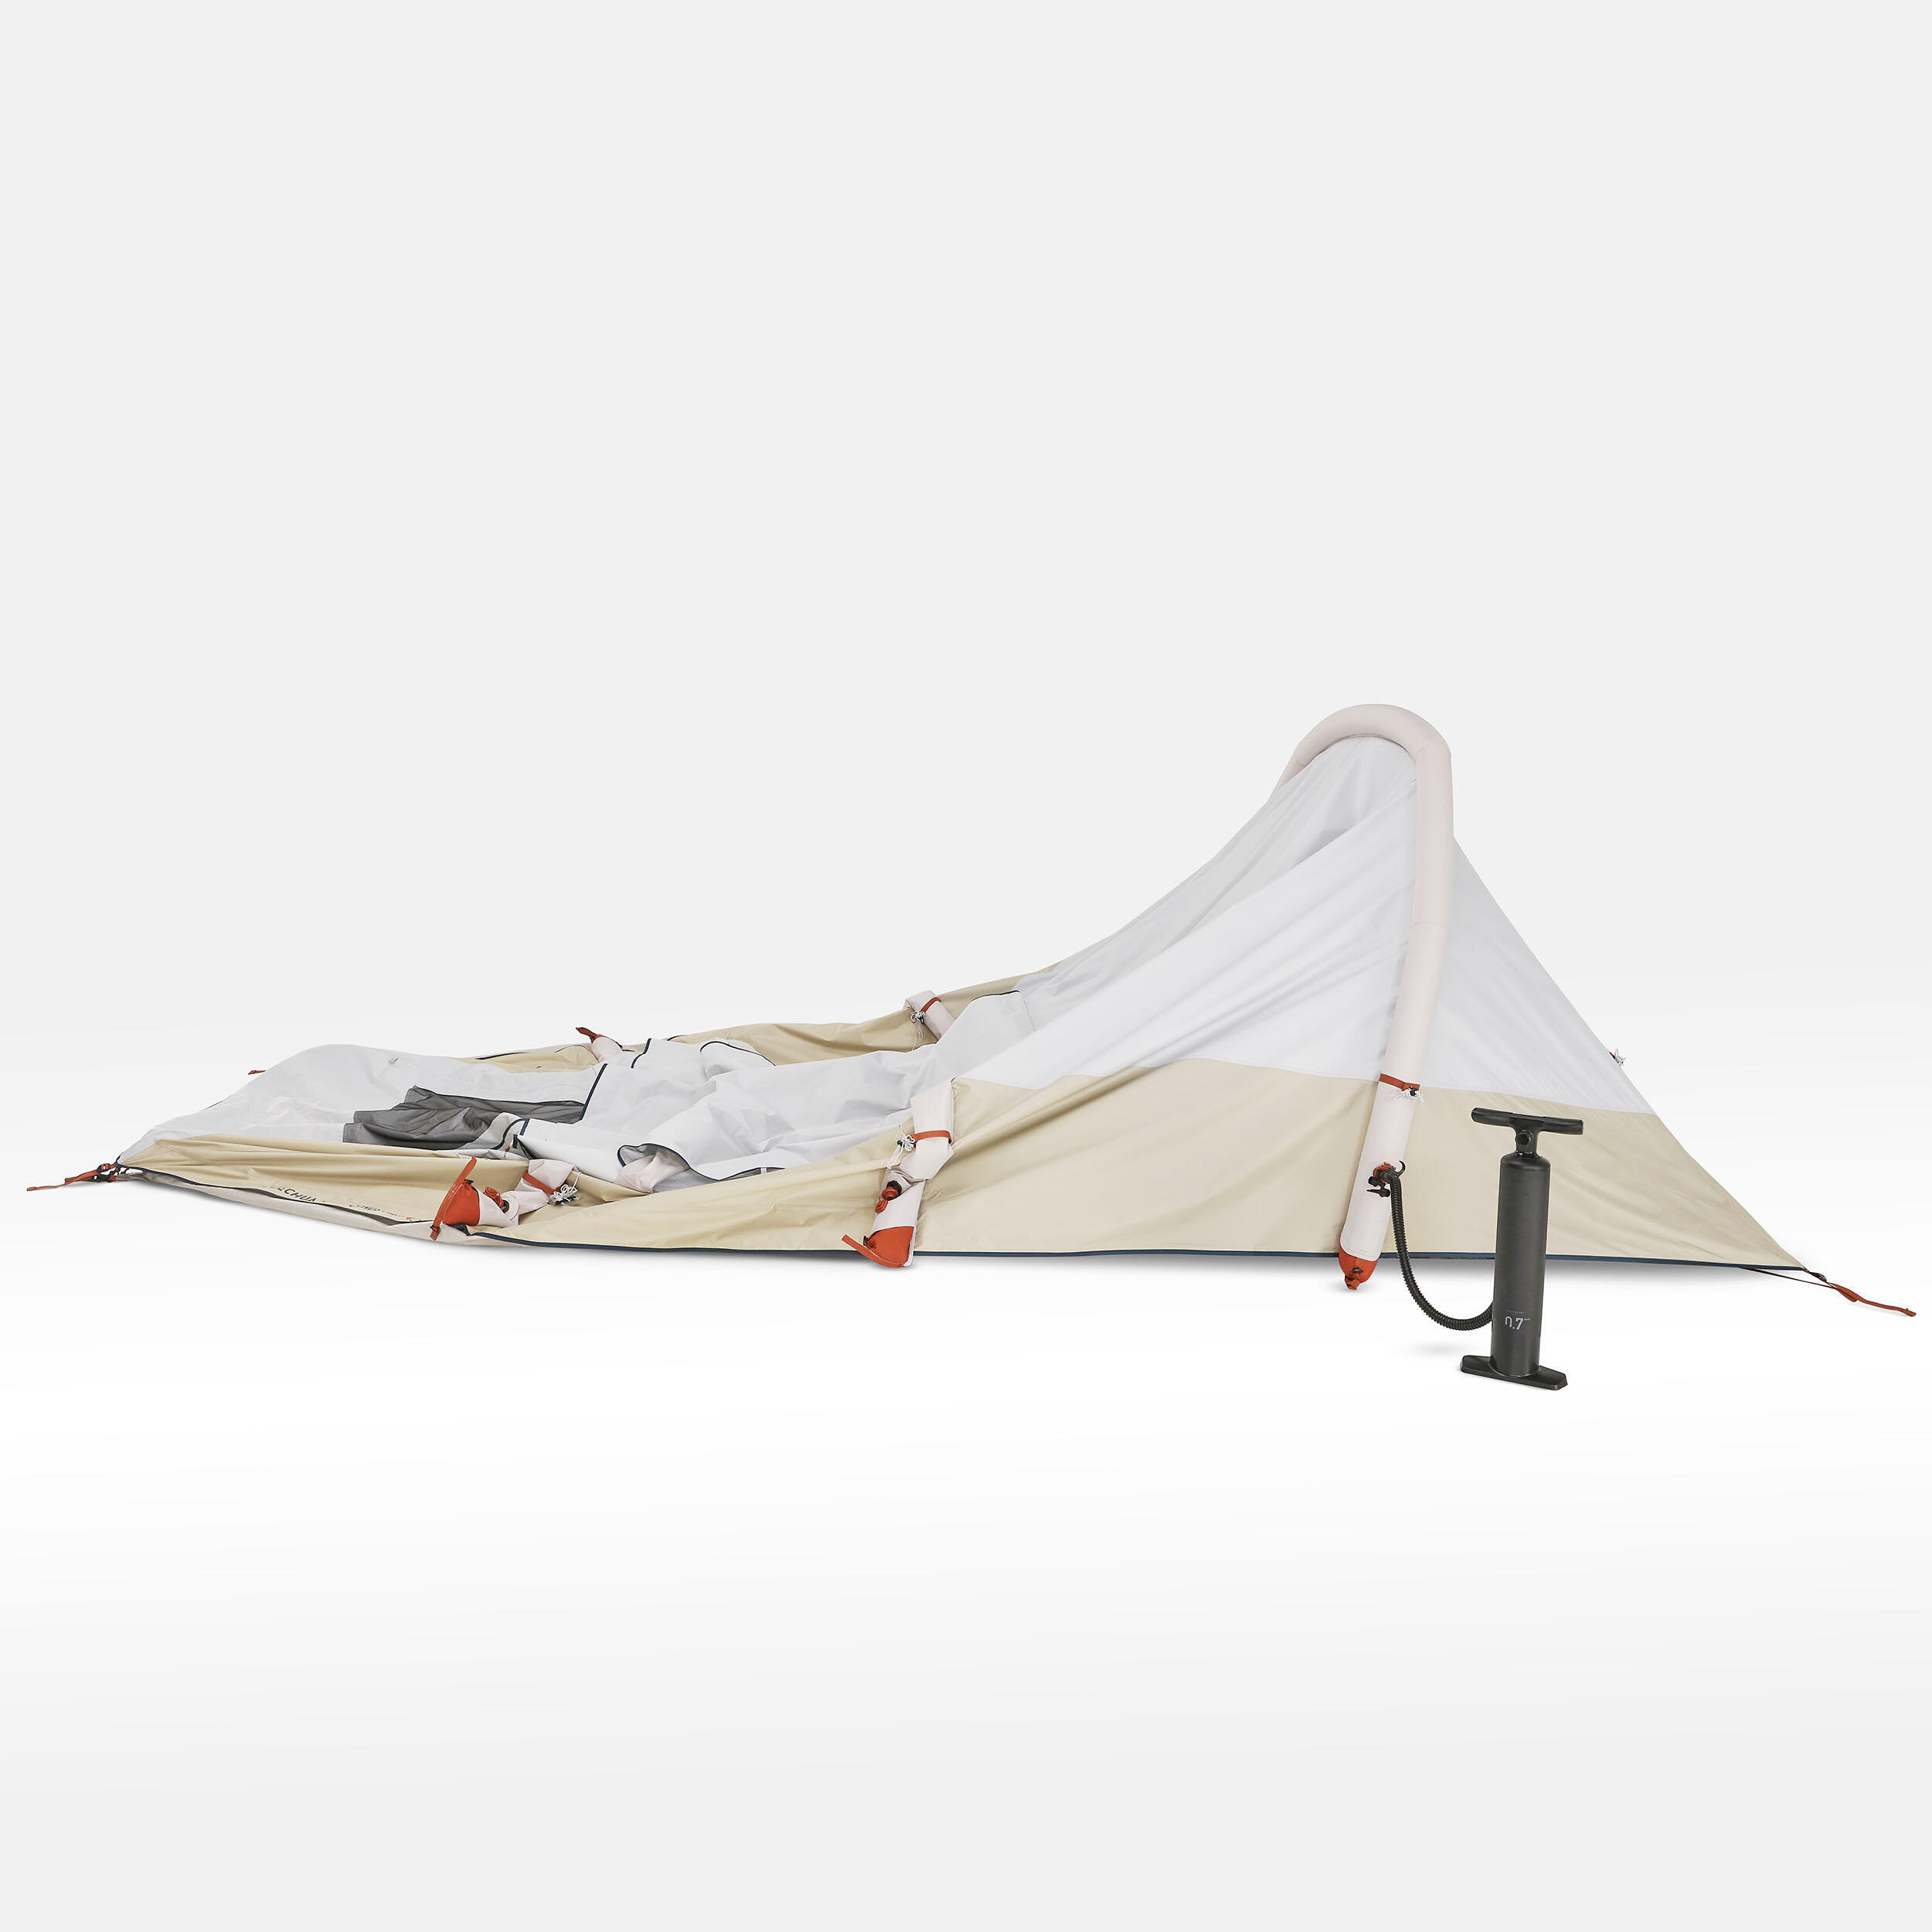 4 Man Inflatable Blackout Tent - Air Seconds 4.1 F&B 28/35